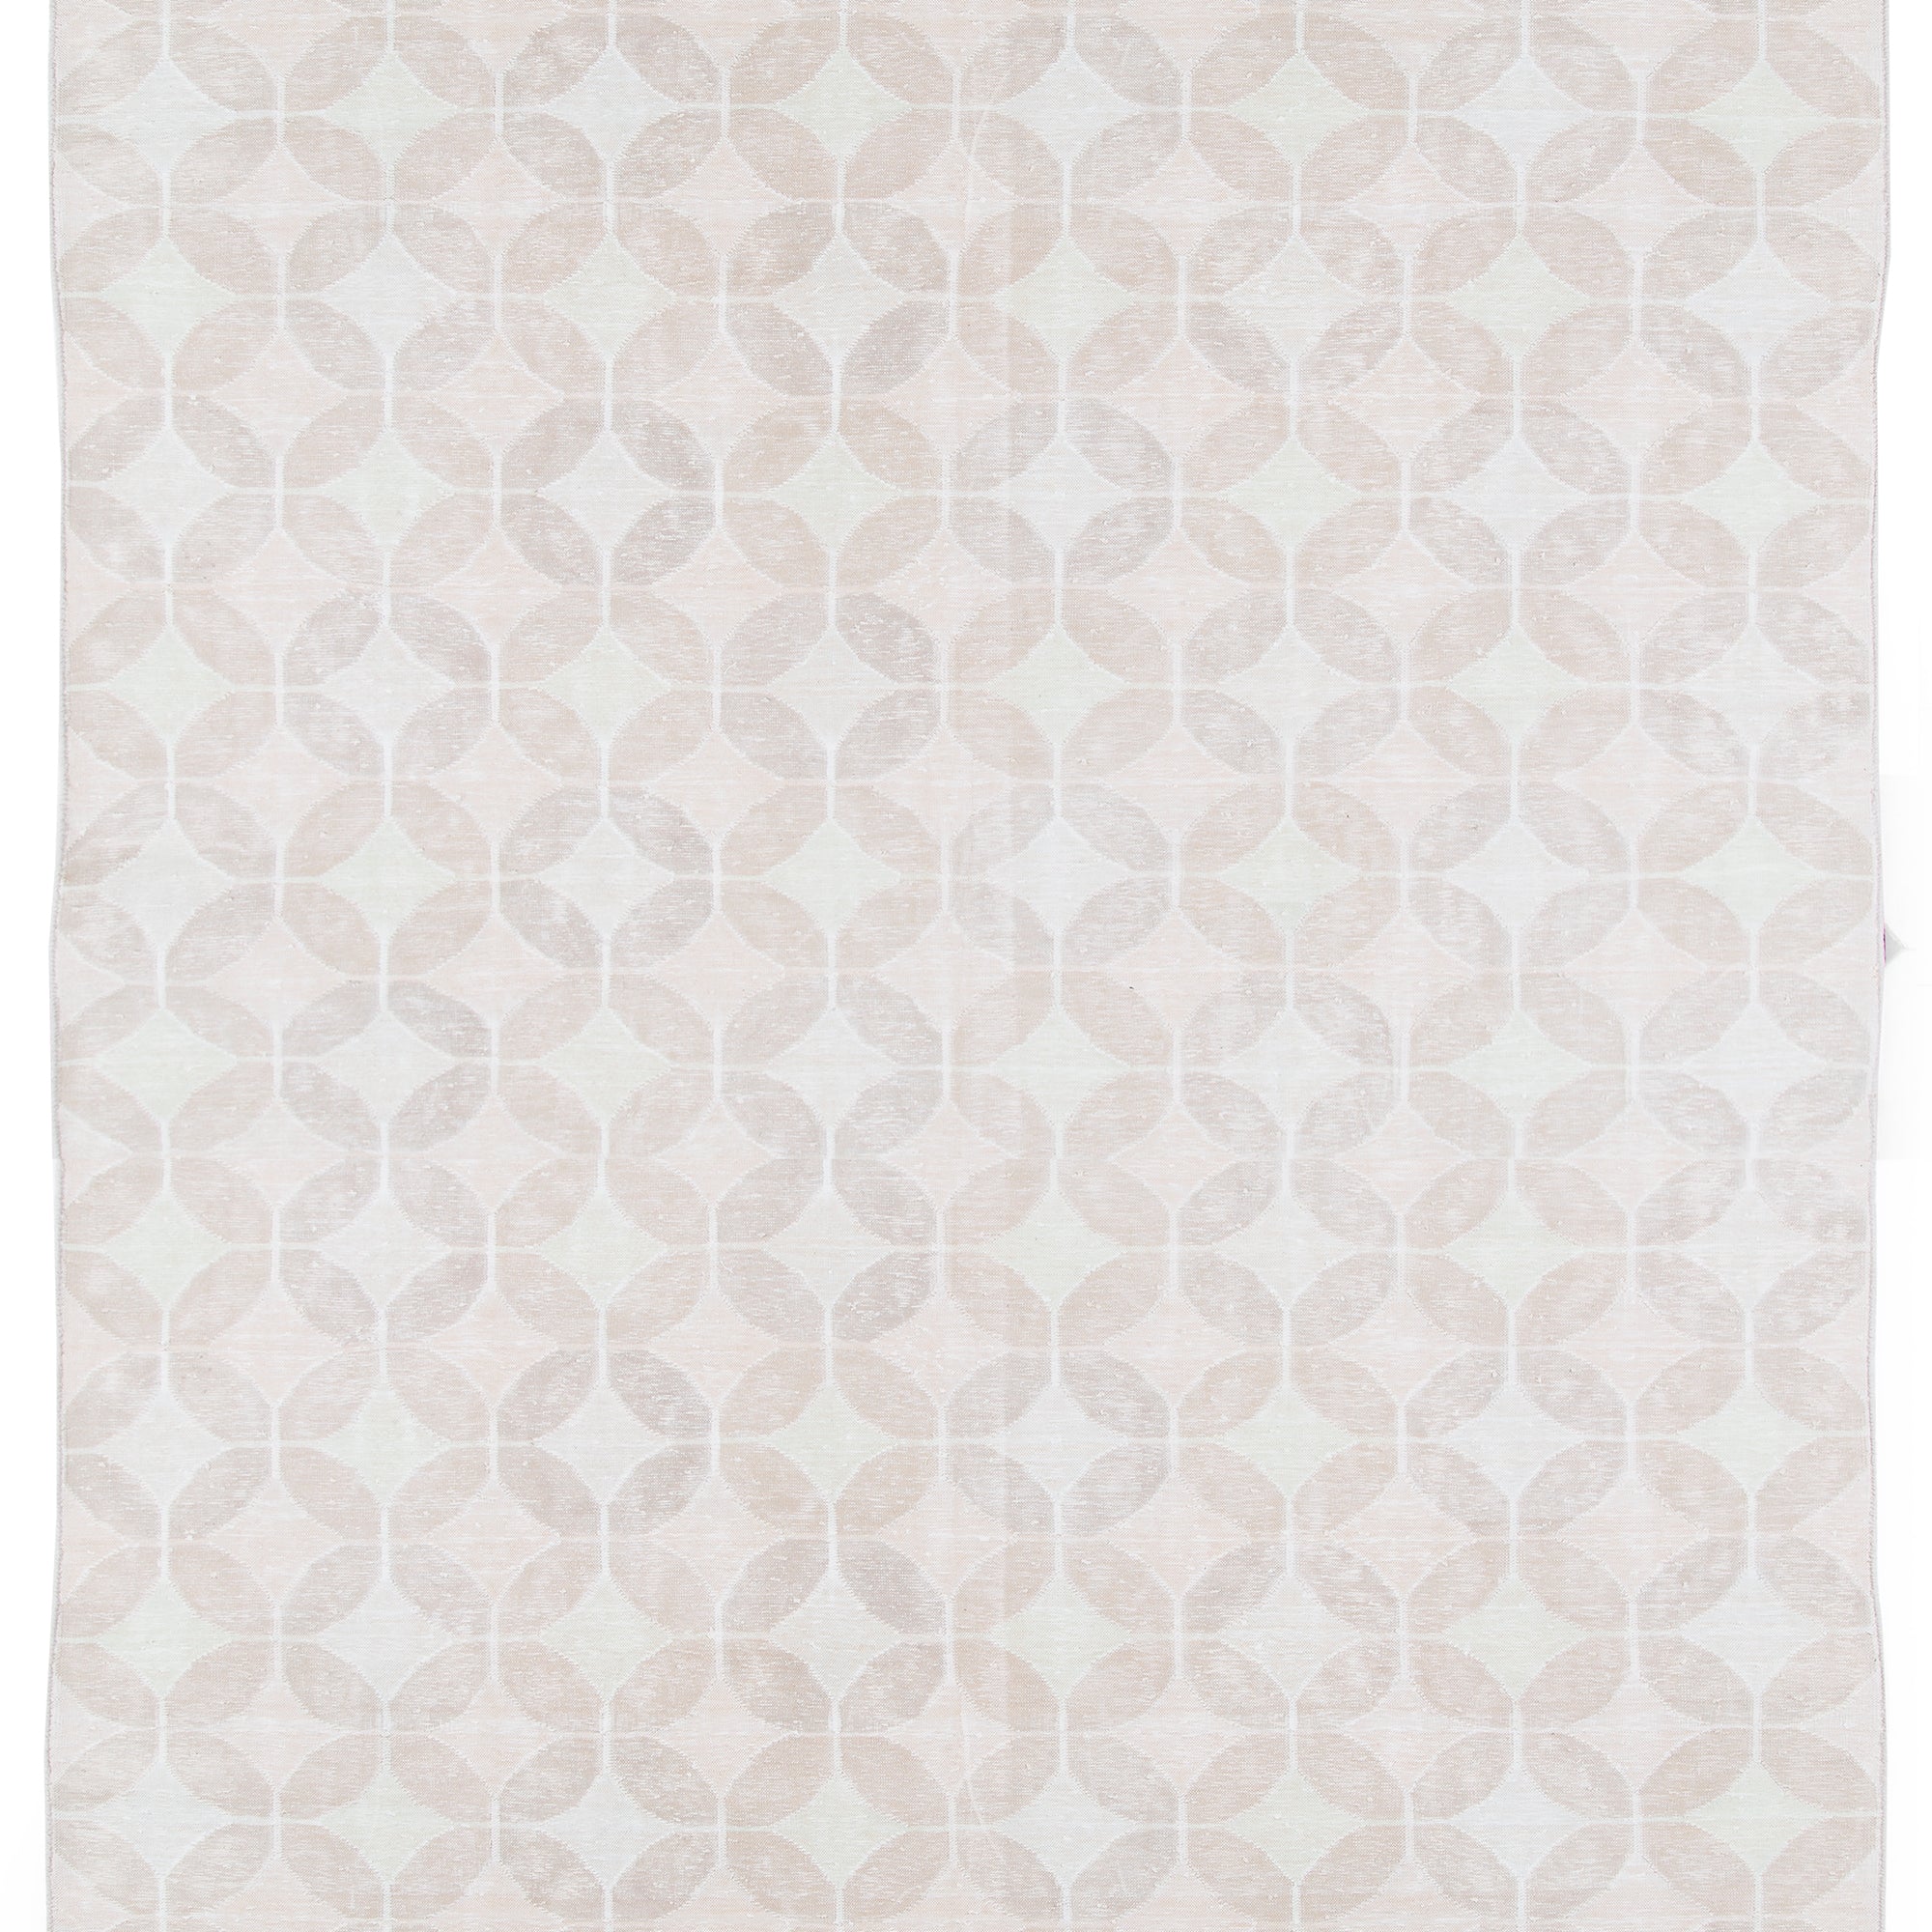 Full size Alhambra Rug in Stonewash featuring pattern of linked circles that create a star like lattice in a range of pale pink tones a soft white field. 